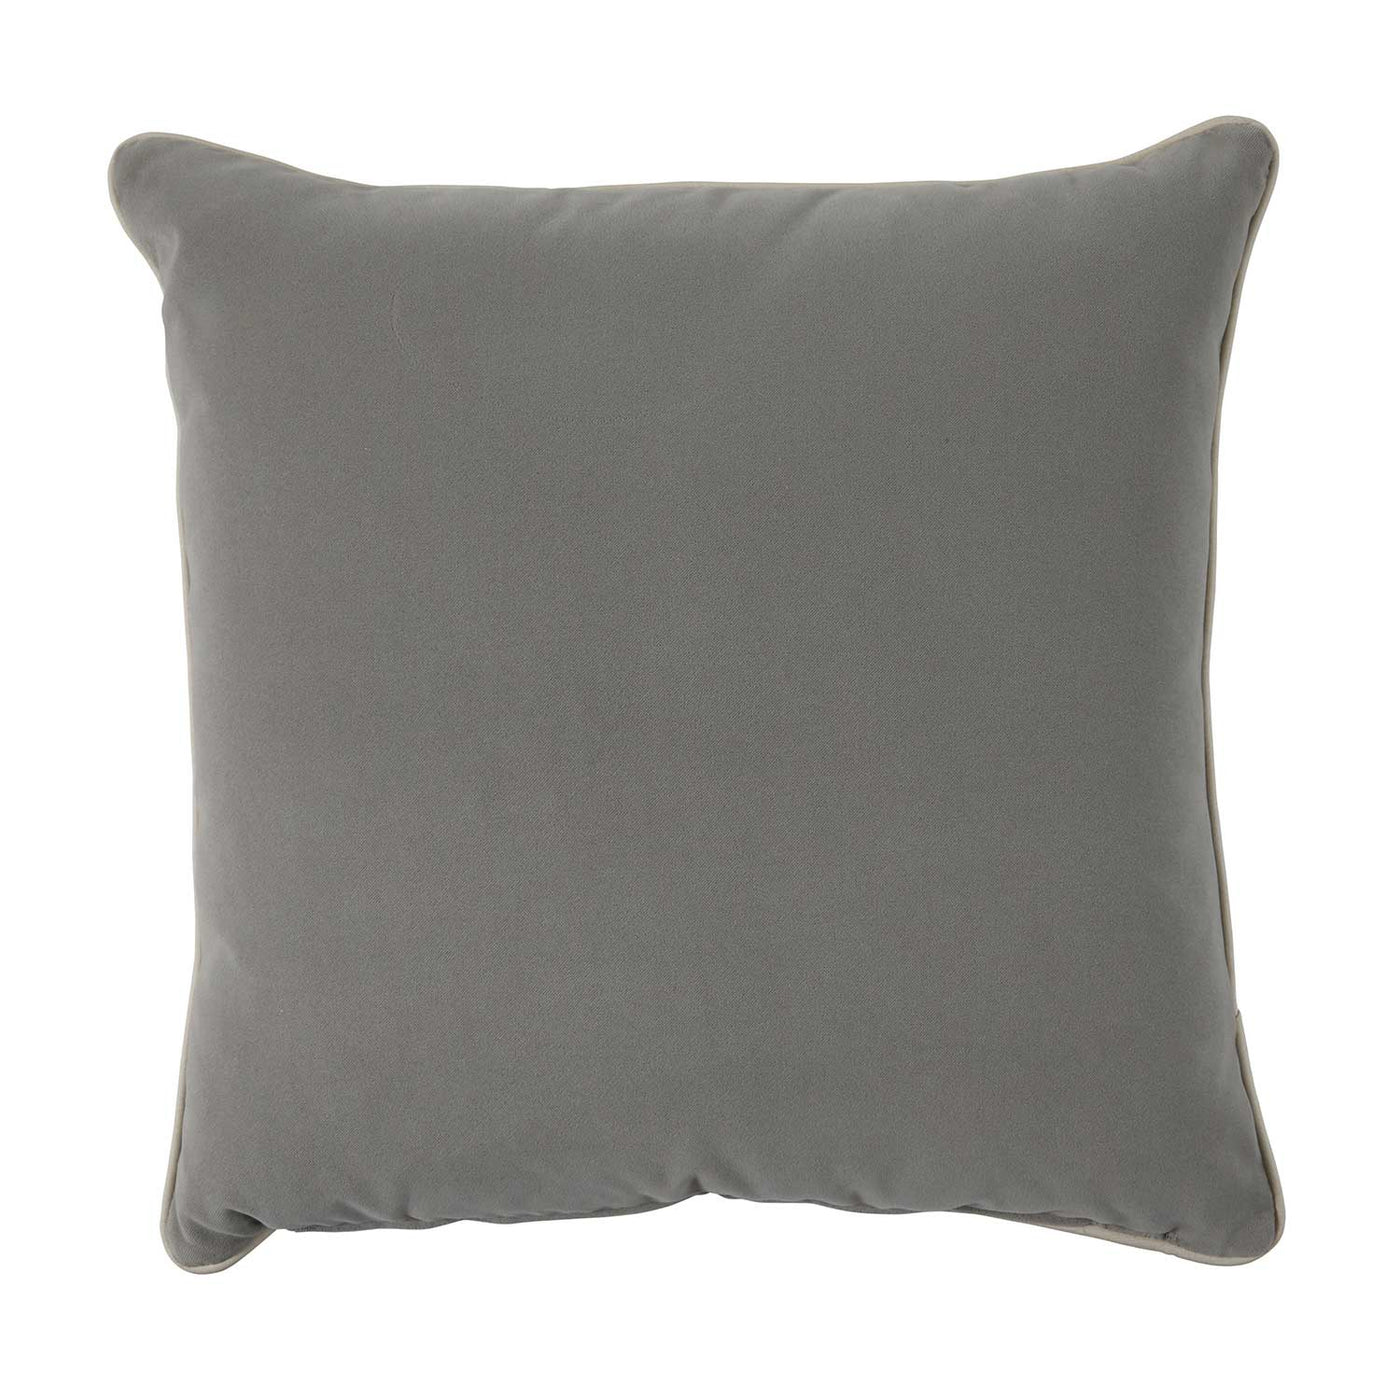 PILLOW LUX LEATHER PEWTER